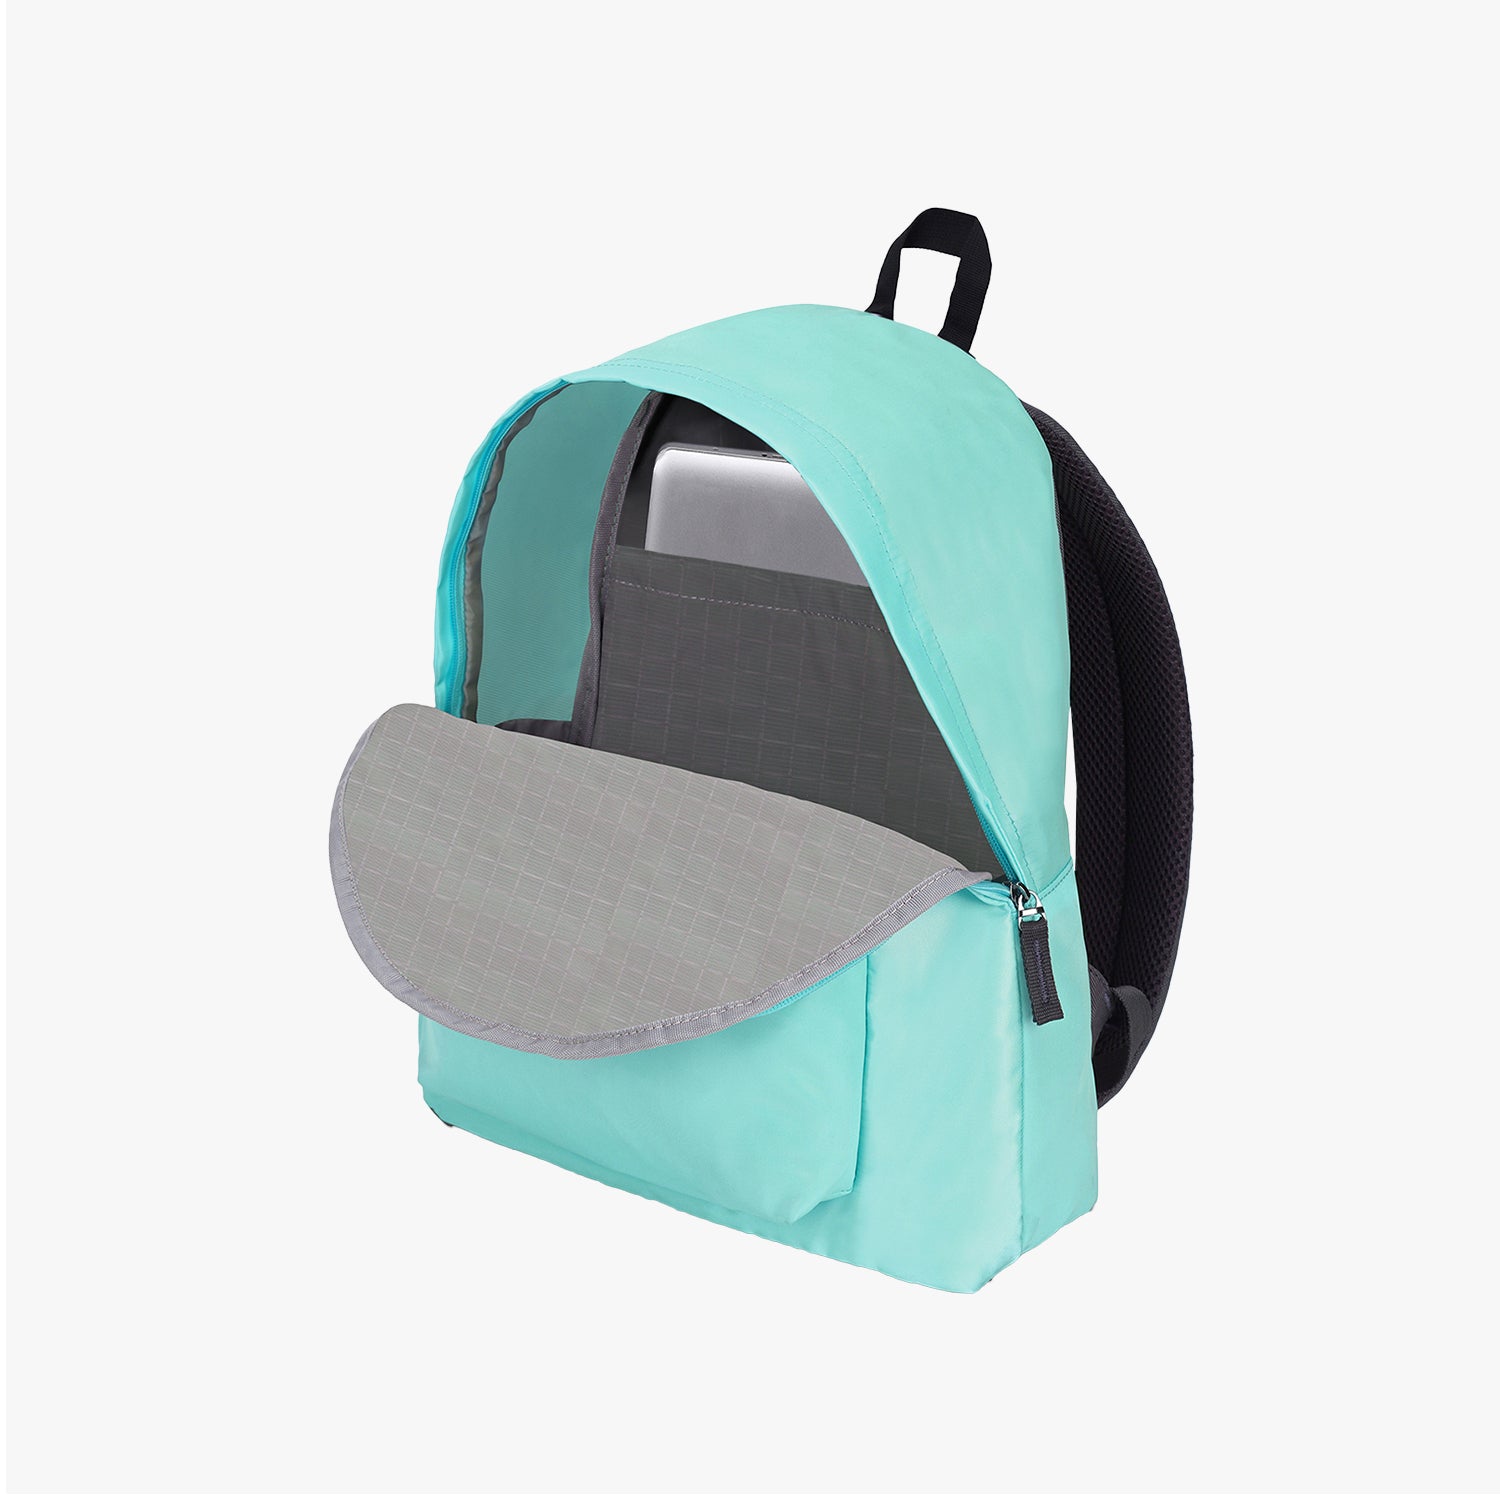 Candy Small Laptop Daypack - Spearmint